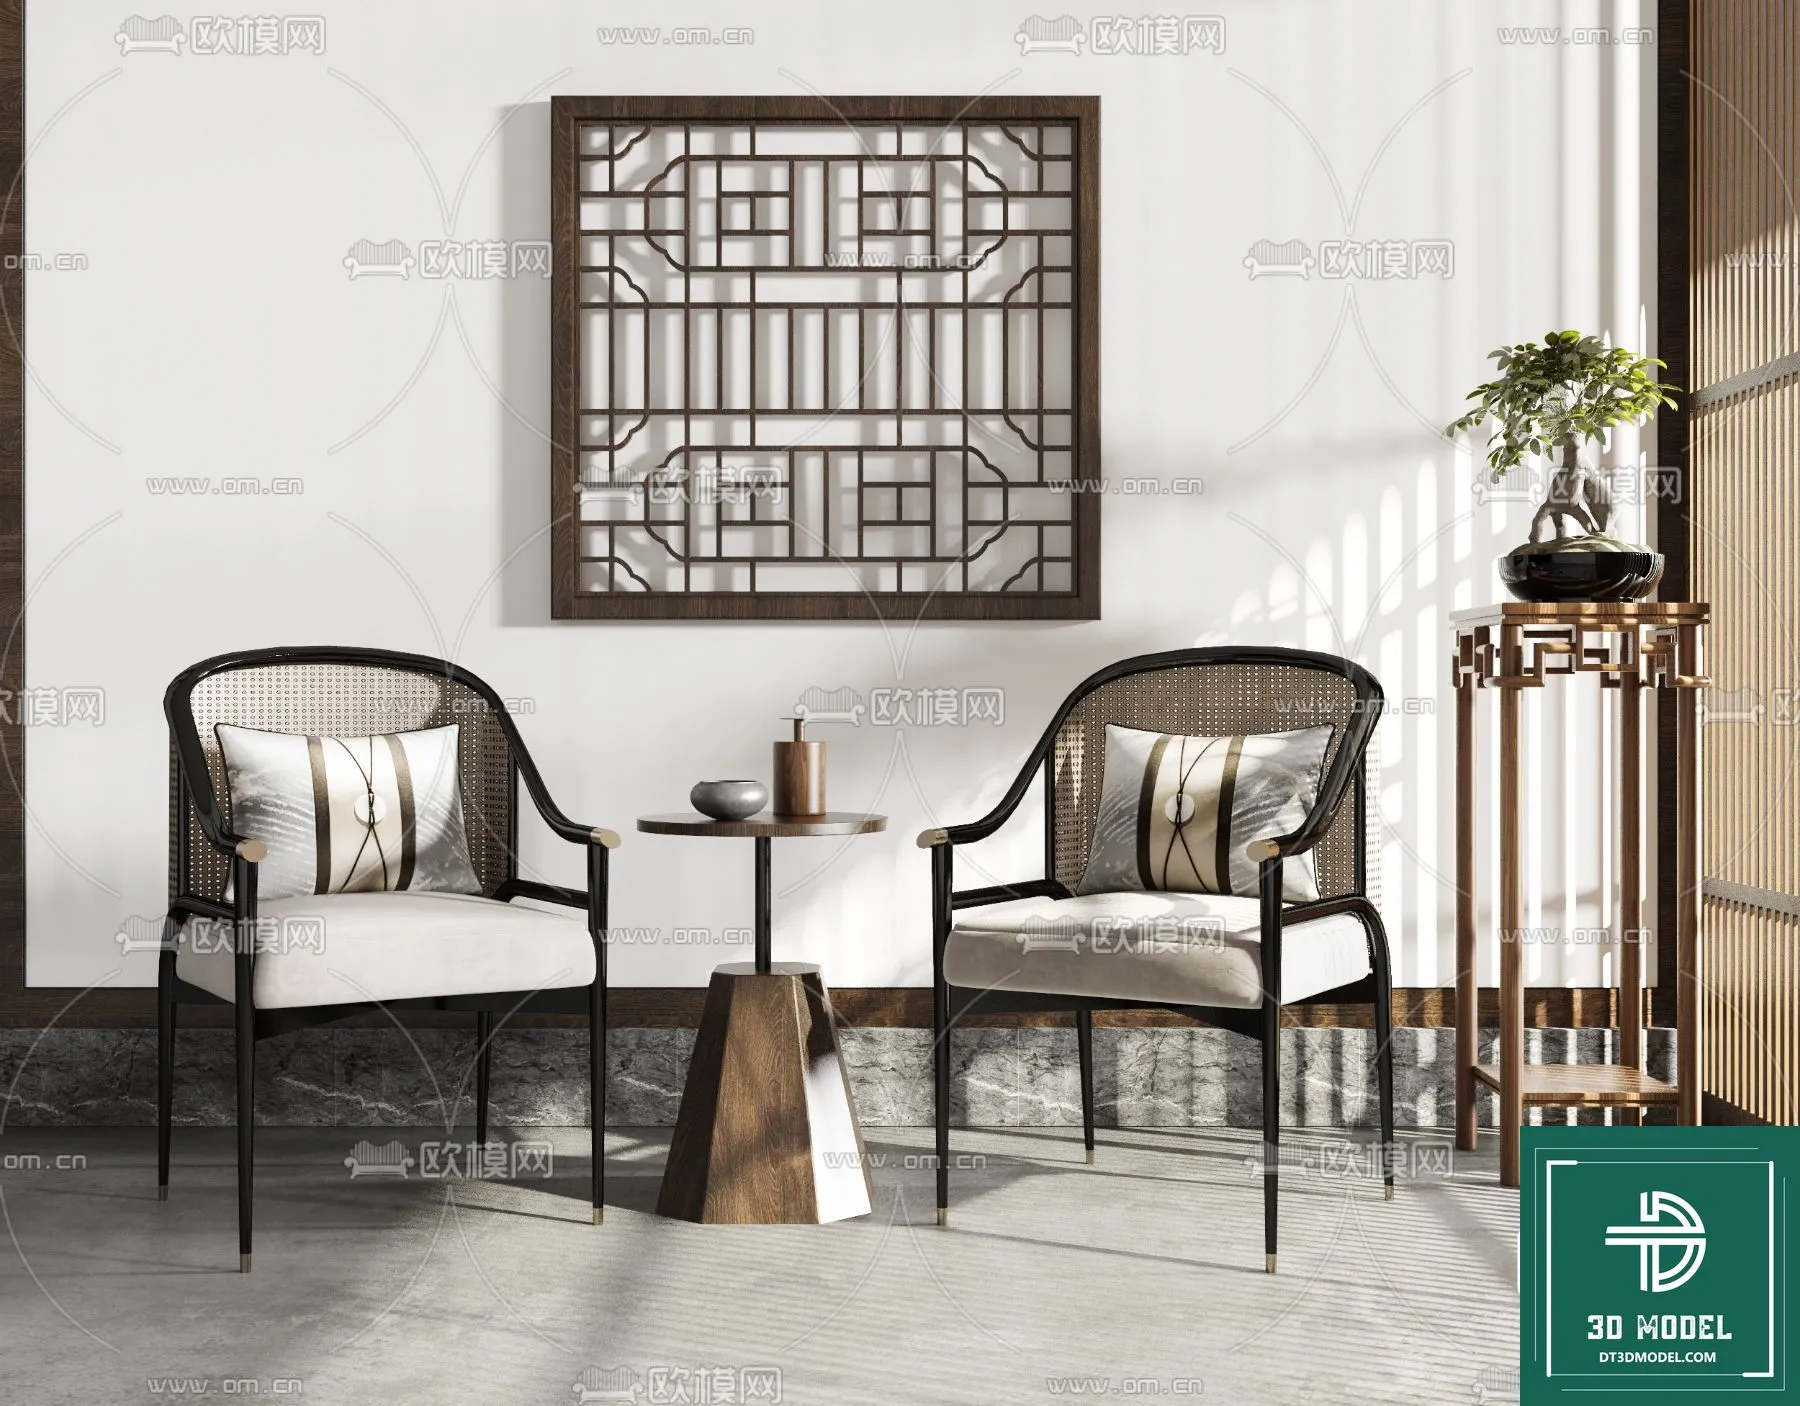 INDOCHINE STYLE – 3D MODELS – 591